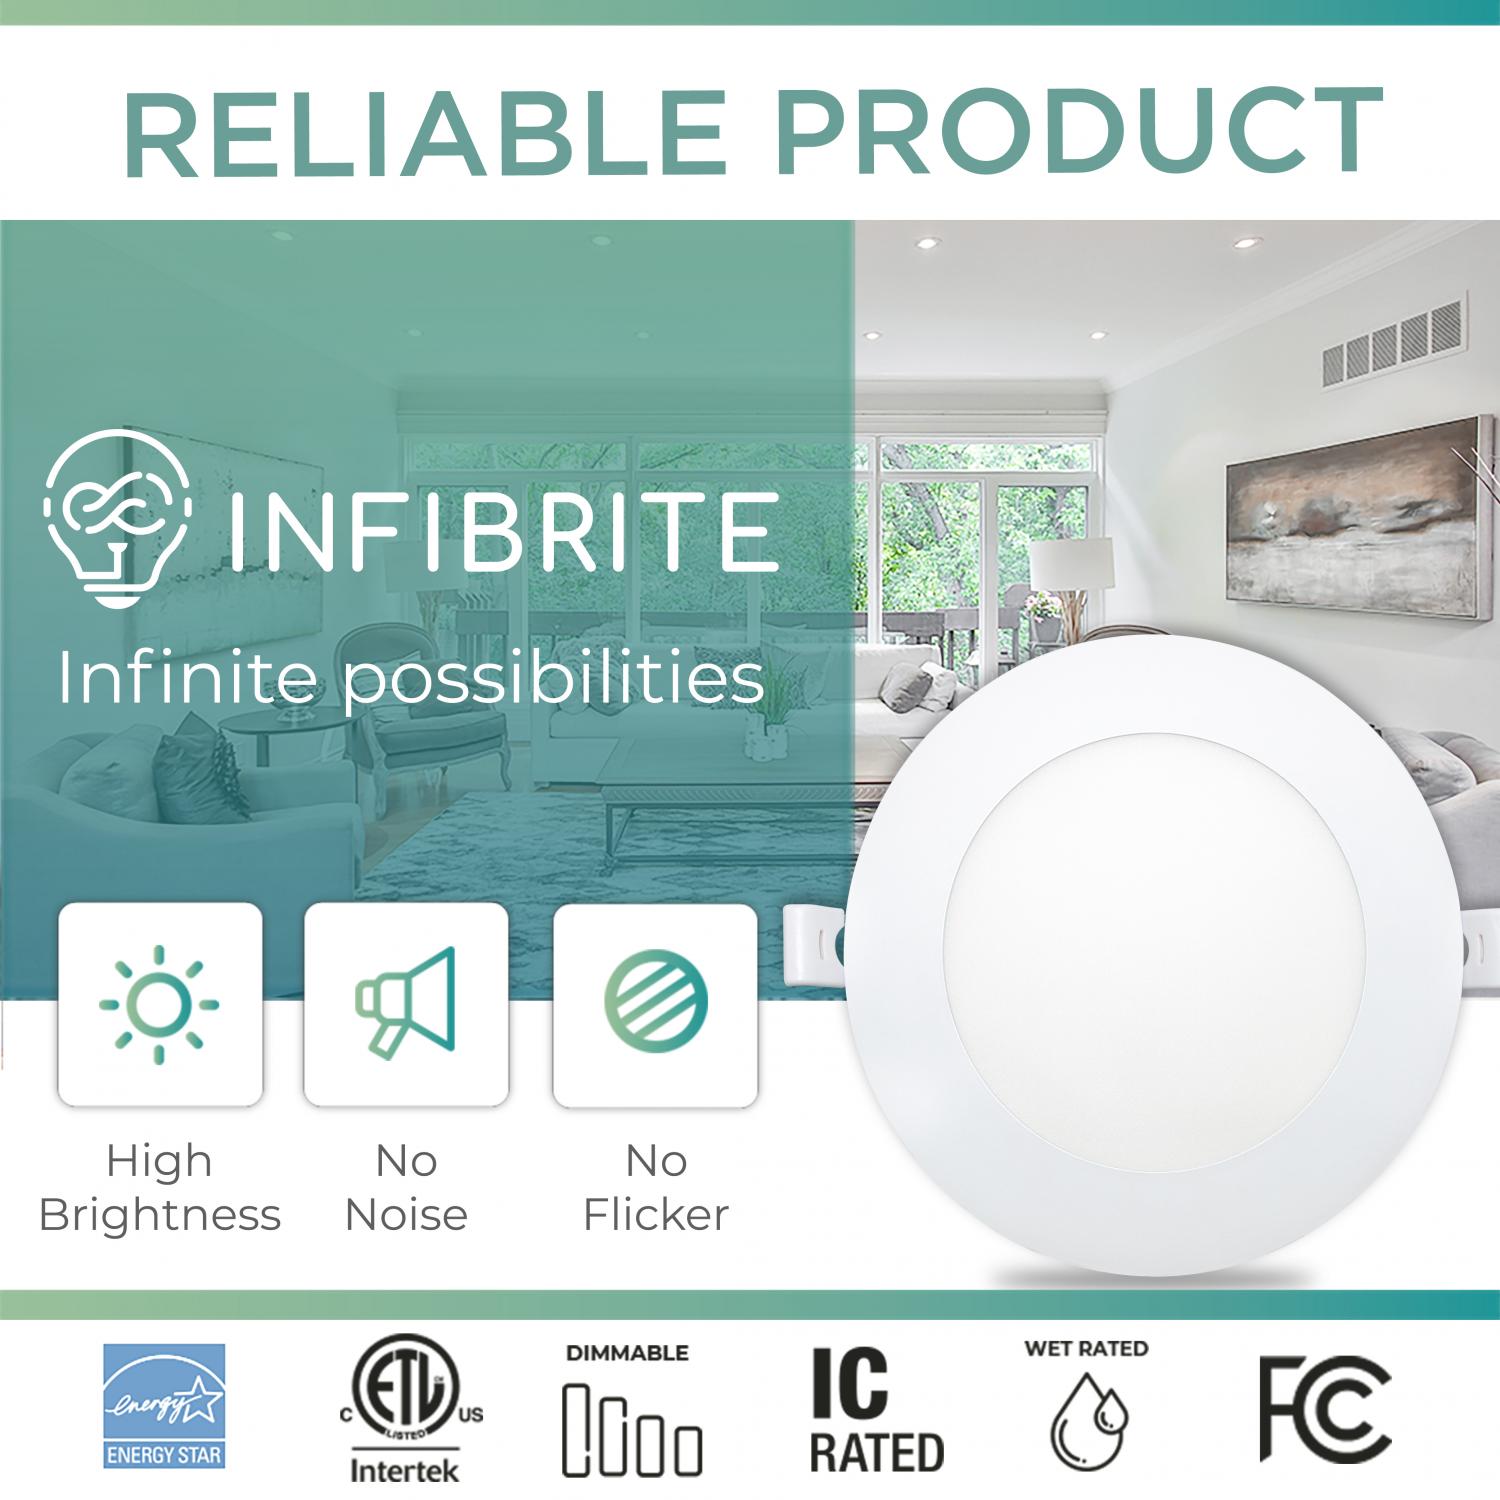 Infibrite 6 Inch 2700K Soft White 12W 1050LM Ultra-Slim LED Ceiling Light with Junction Box, Flush Mount, Dimmable, Fixture for Bedroom, Wet Rated for Bathroom, Easy Install, 110W Eqv, ETL & Energy Star, US Company (24 Pack)